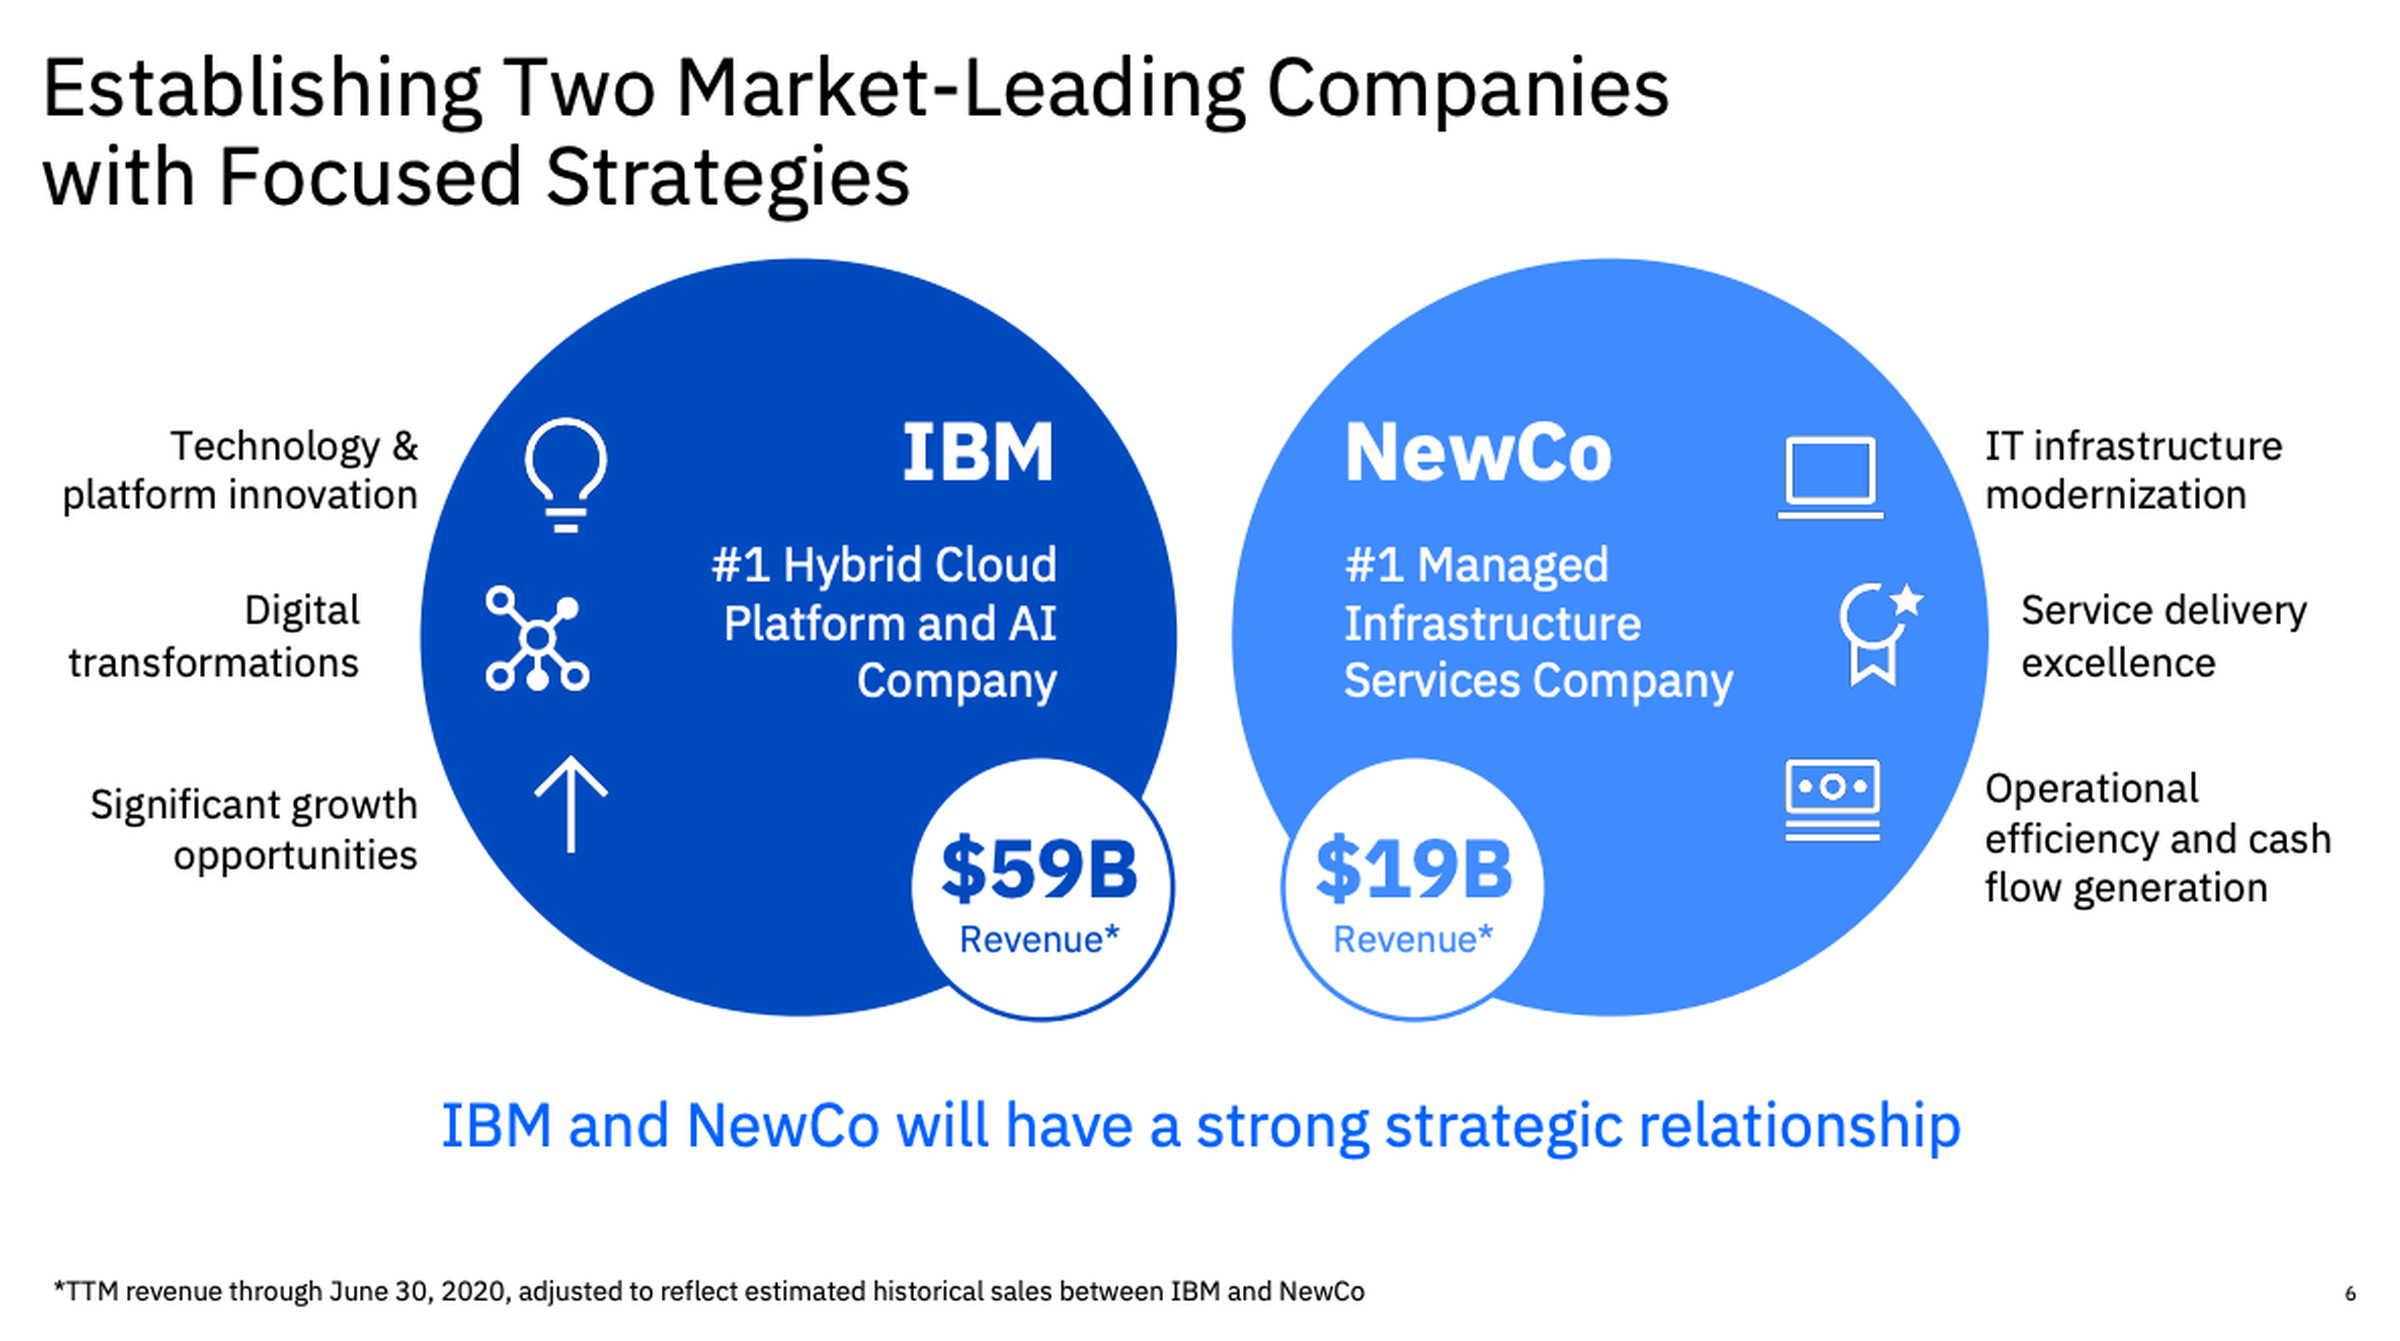 IBM will be split into IBM and NewCo by the end of 2021. 